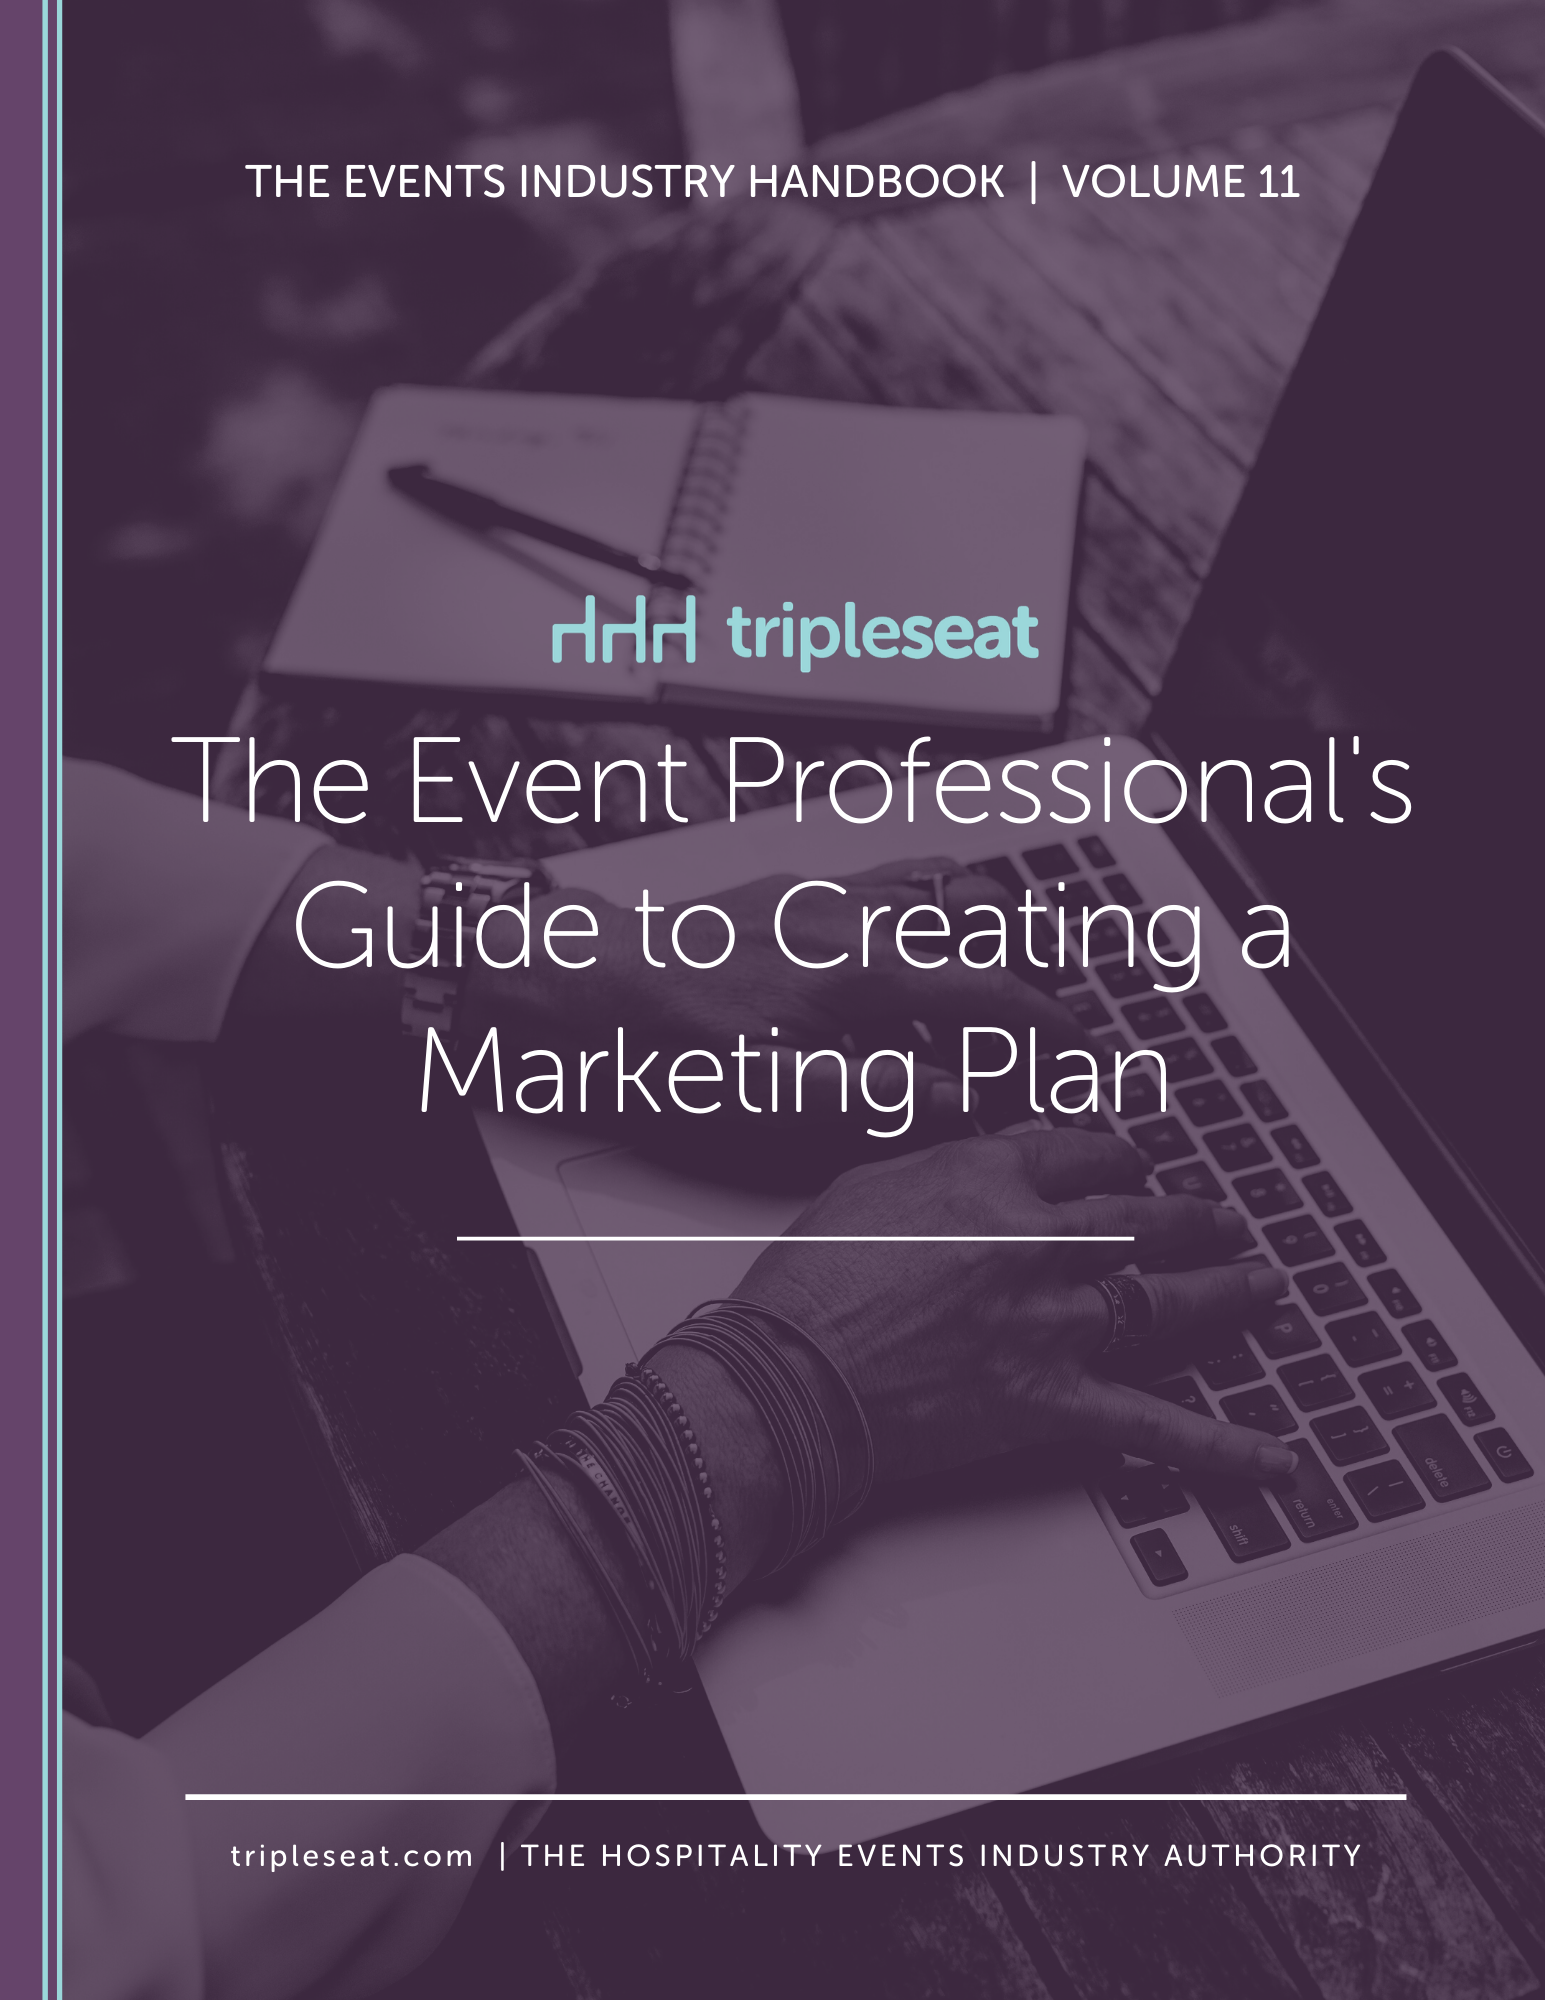 The Event Professionals Guide to Creating a Marketing Plan_Cover Image